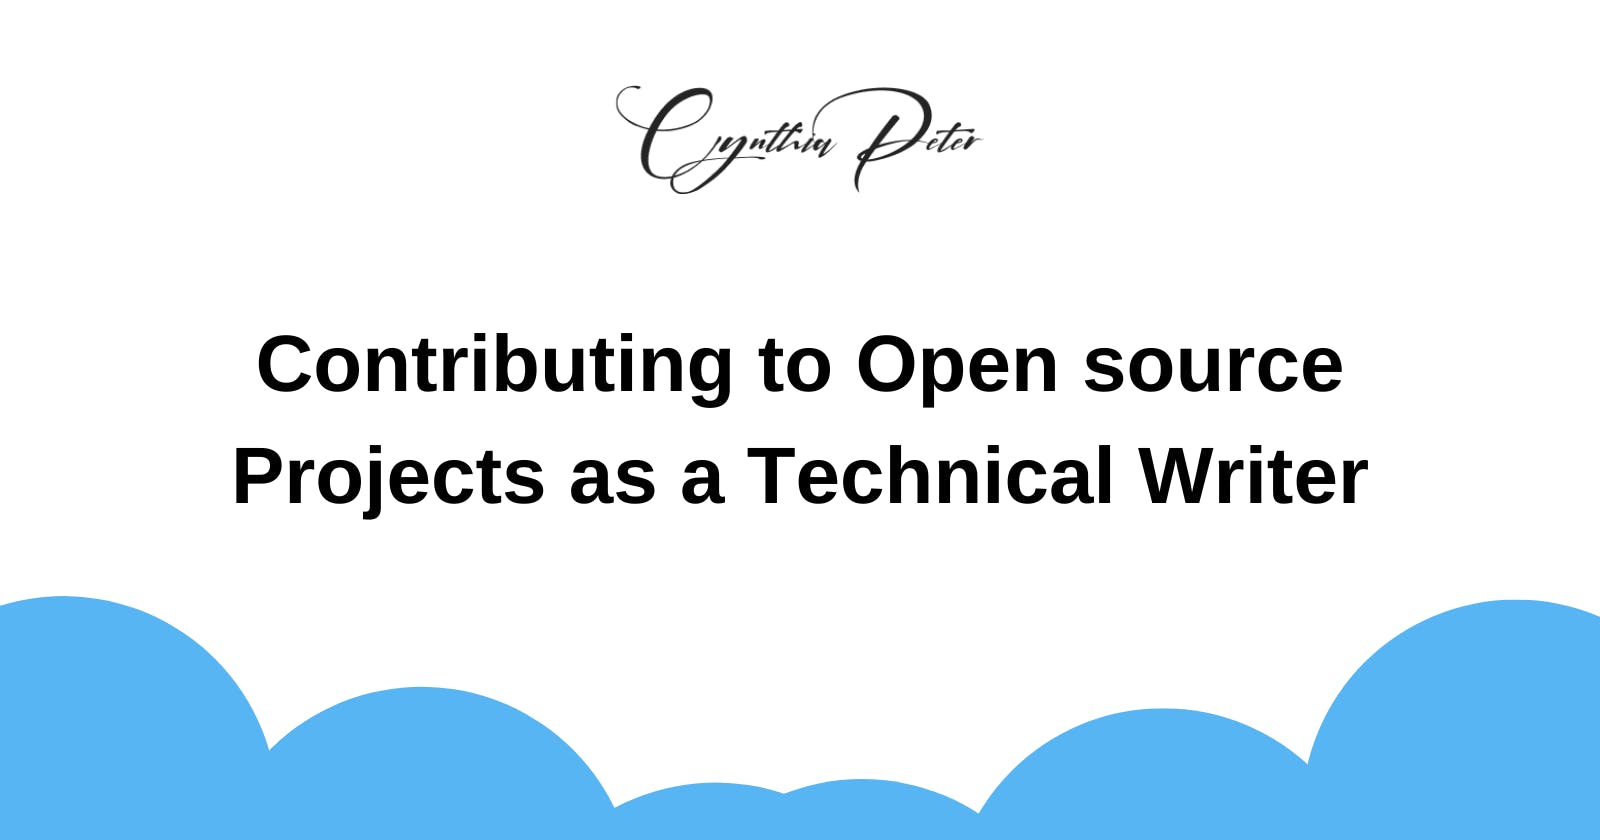 Contributing to open source projects as a Technical writer - The what and why.